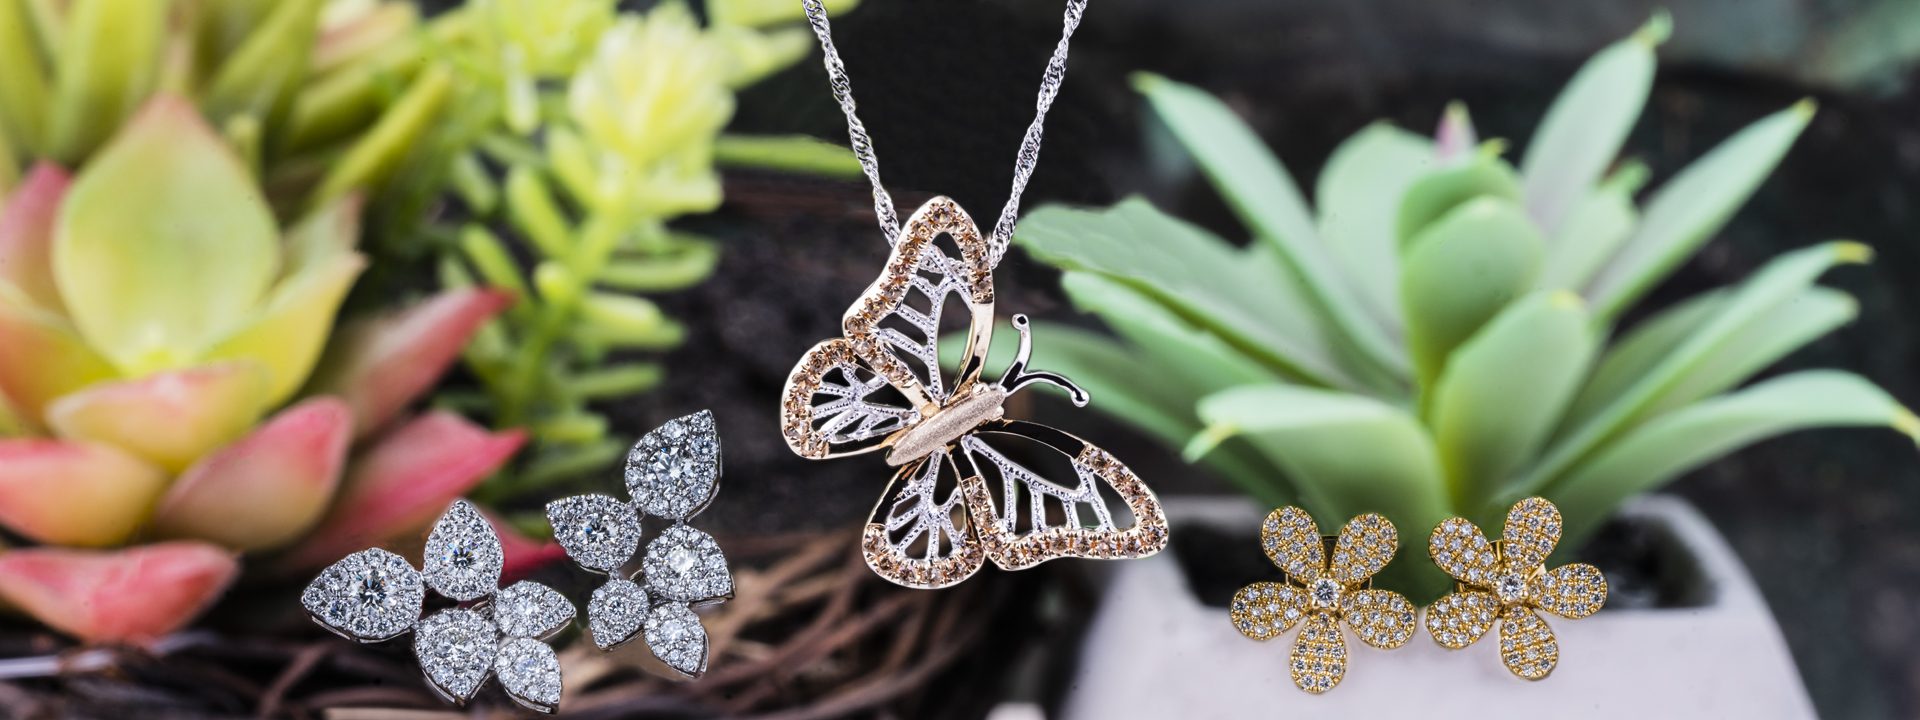 White gold diamond leaf earrings, yellow gold flower stud earrings, and rose and white gold diamond butterfly pendant in front of succulents.